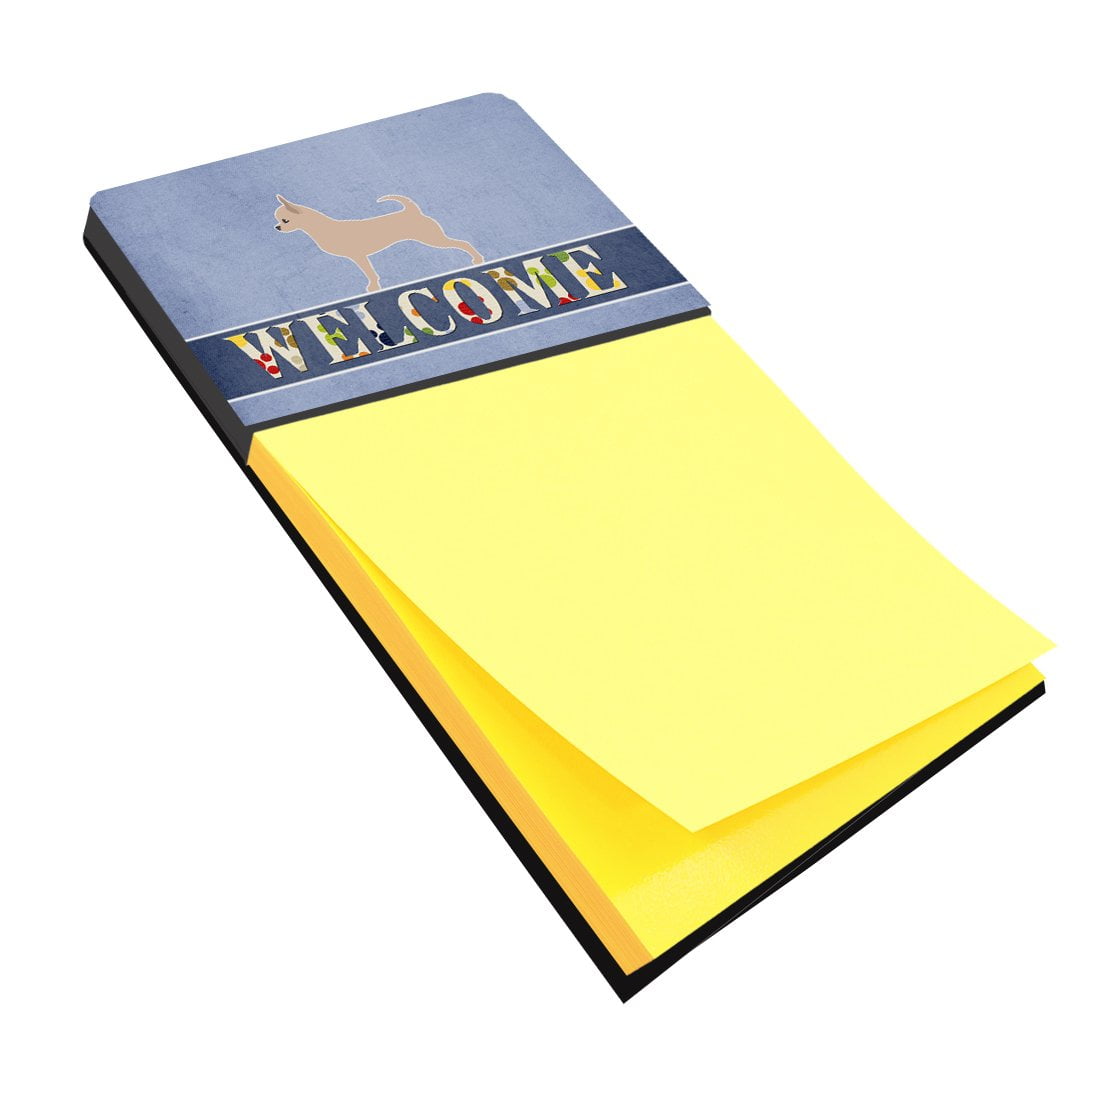 Bb5554sn Chihuahua Welcome Sticky Note Holder